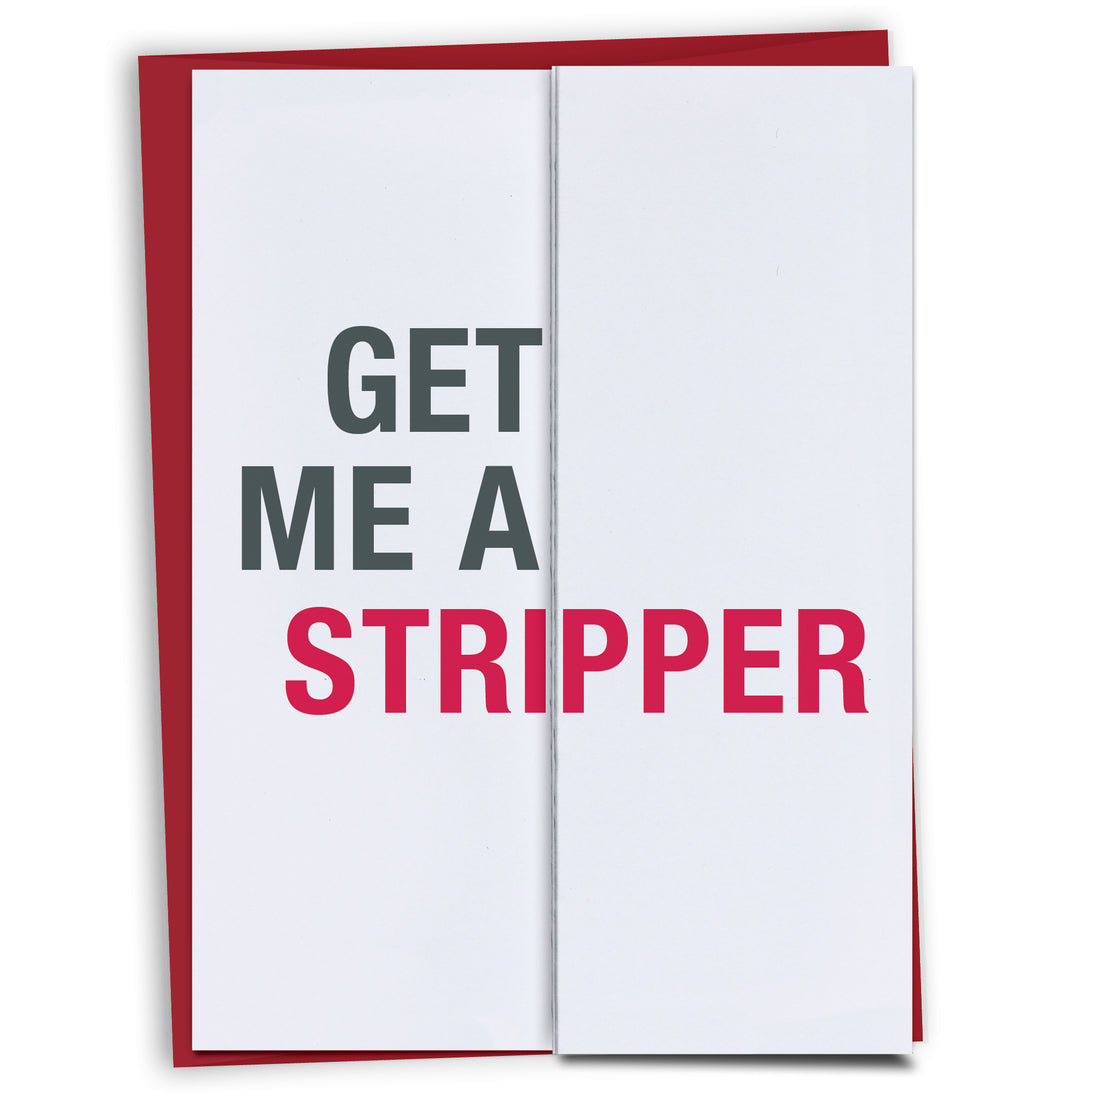 Get me a stripper funny way to ask bridesmaid